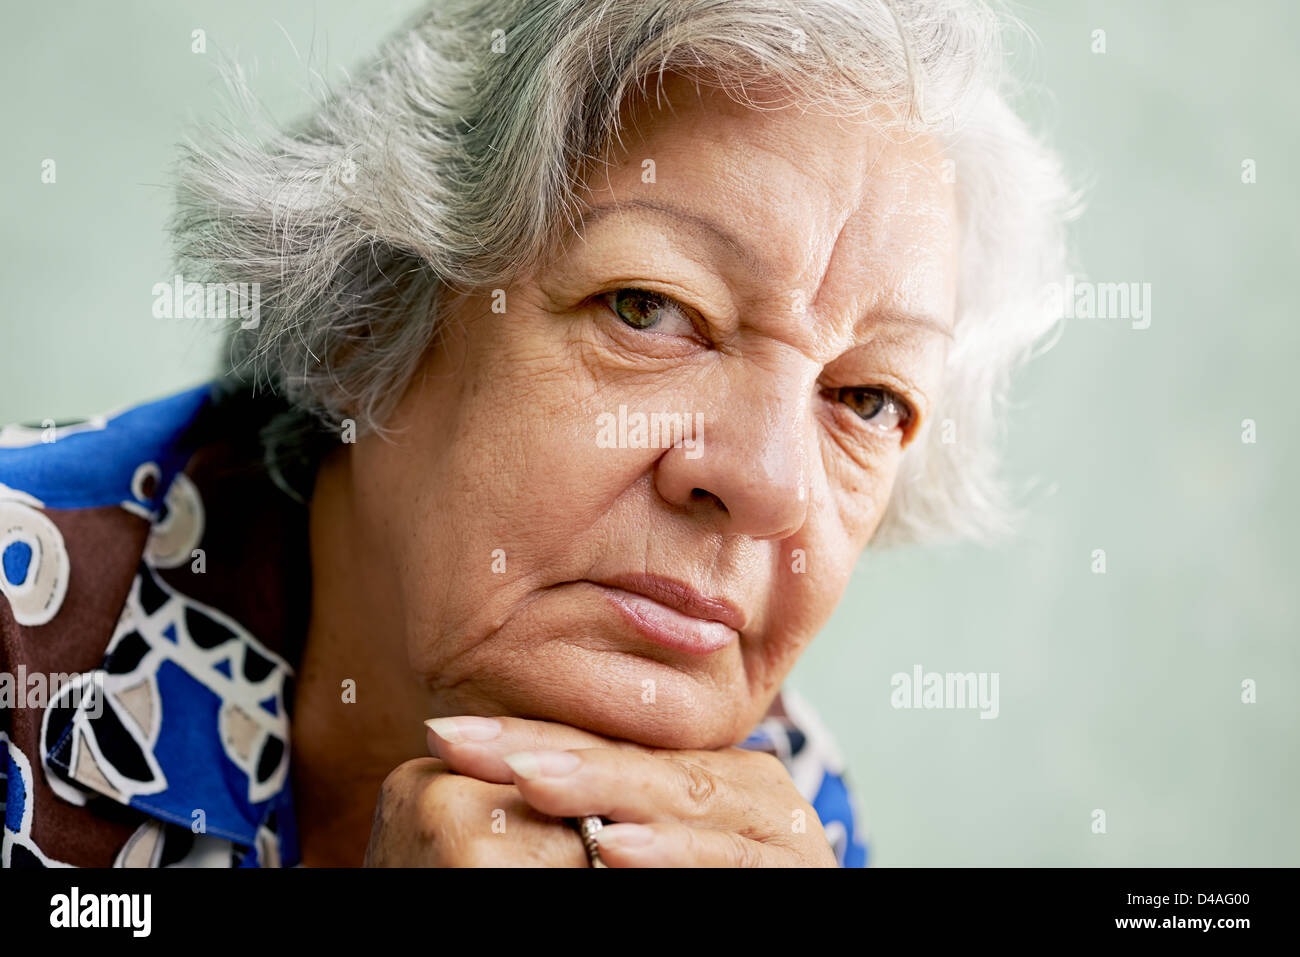 People And Emotions Portrait Of Depressed Senior Hispanic Woman With White Hair Looking At